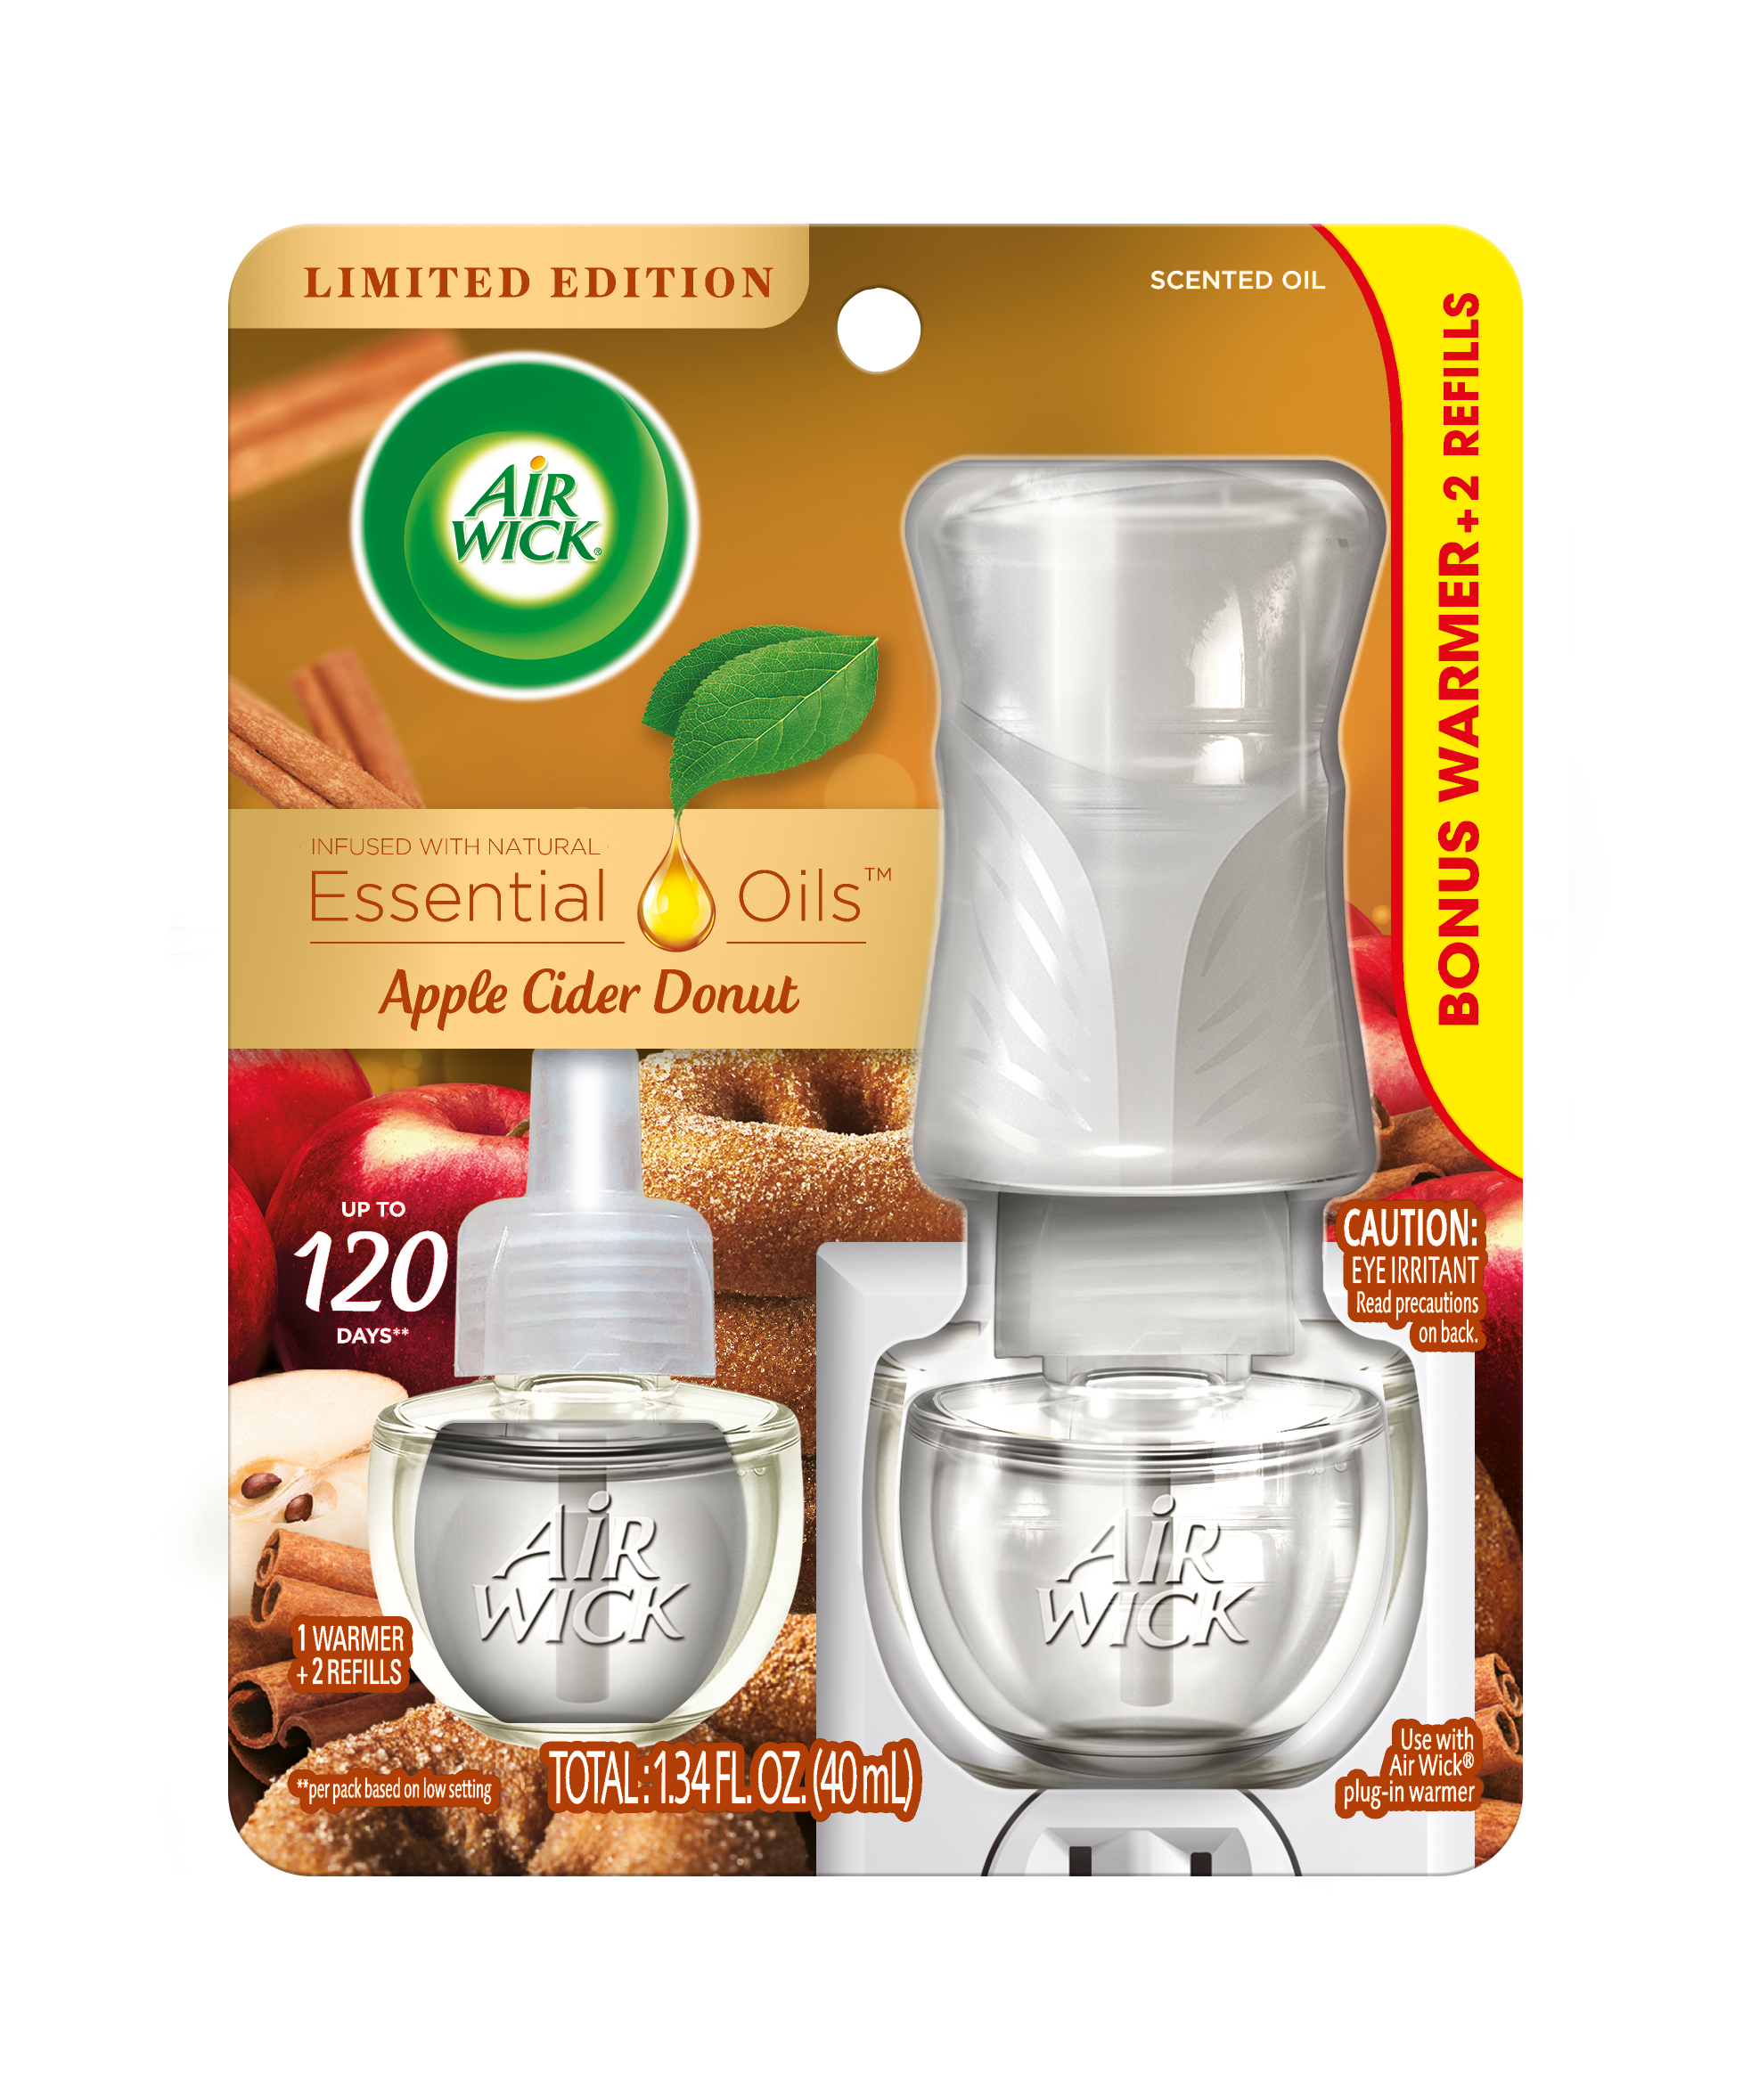 AIR WICK® Scented Oil - Apple Cider Donut - Kit